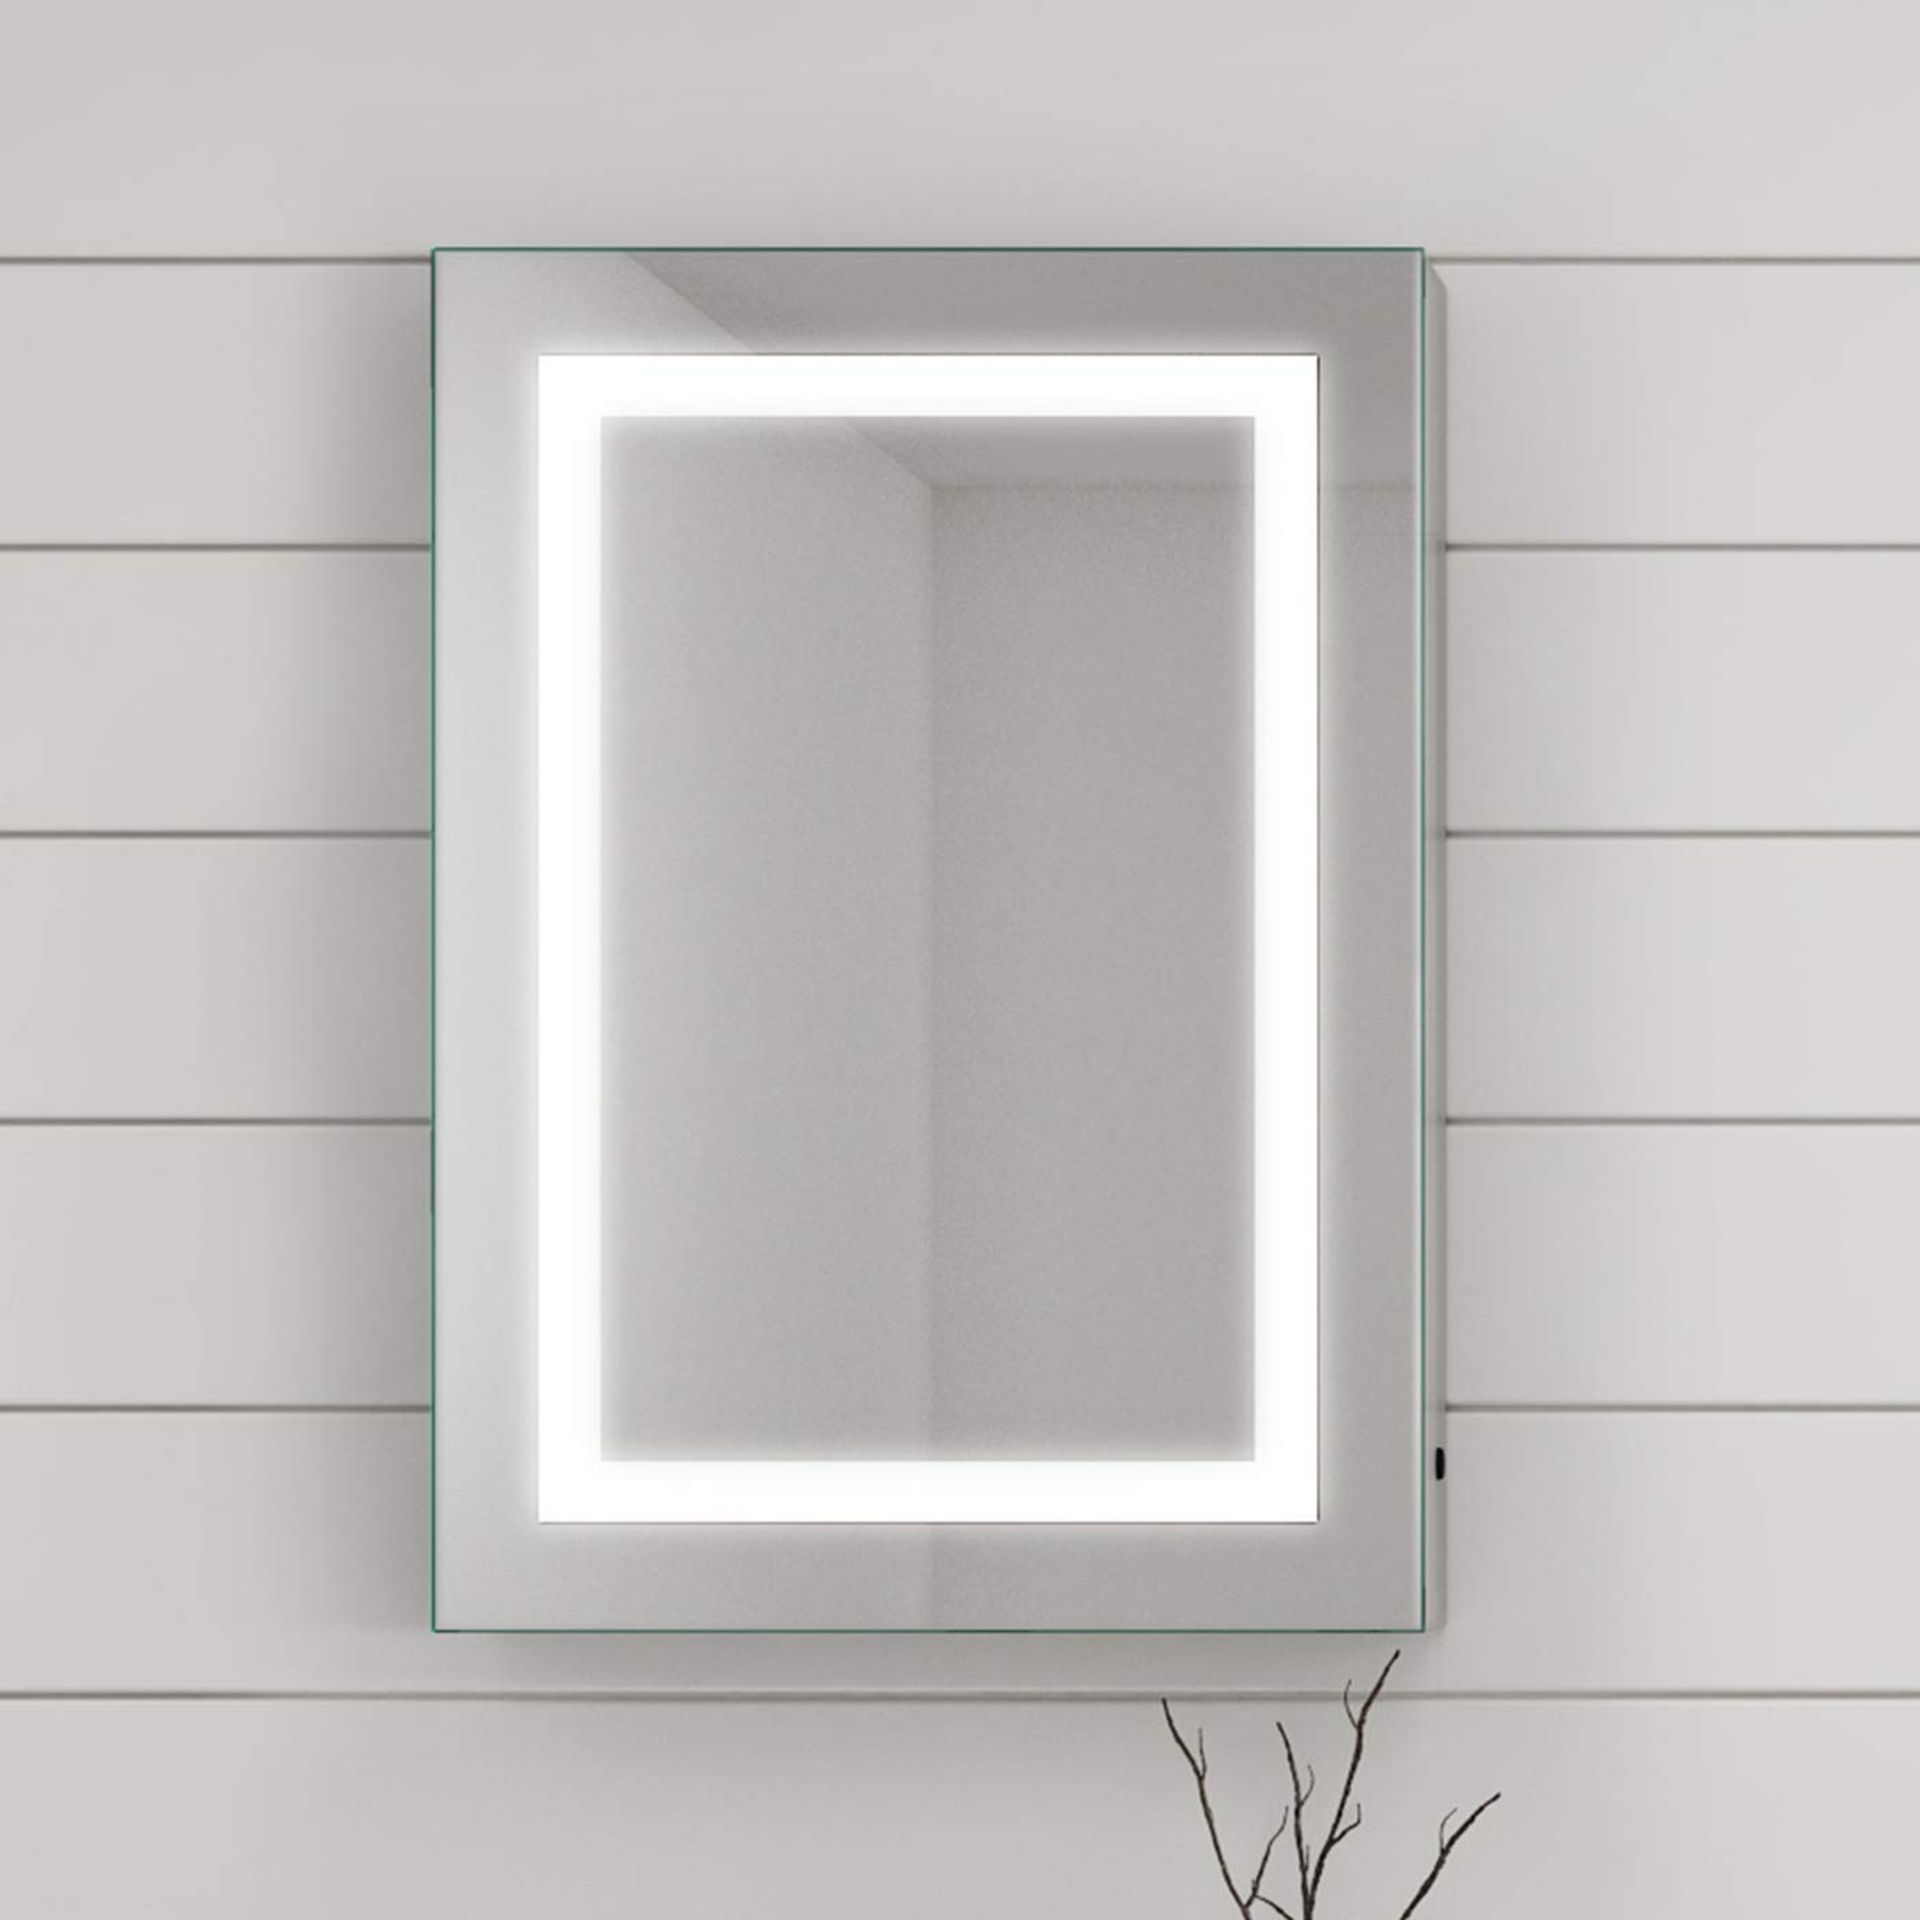 500x700mm Nova Illuminated LED Mirror Cabinet. RRP £624.99. We love this mirror cabinet as it ... - Image 4 of 4